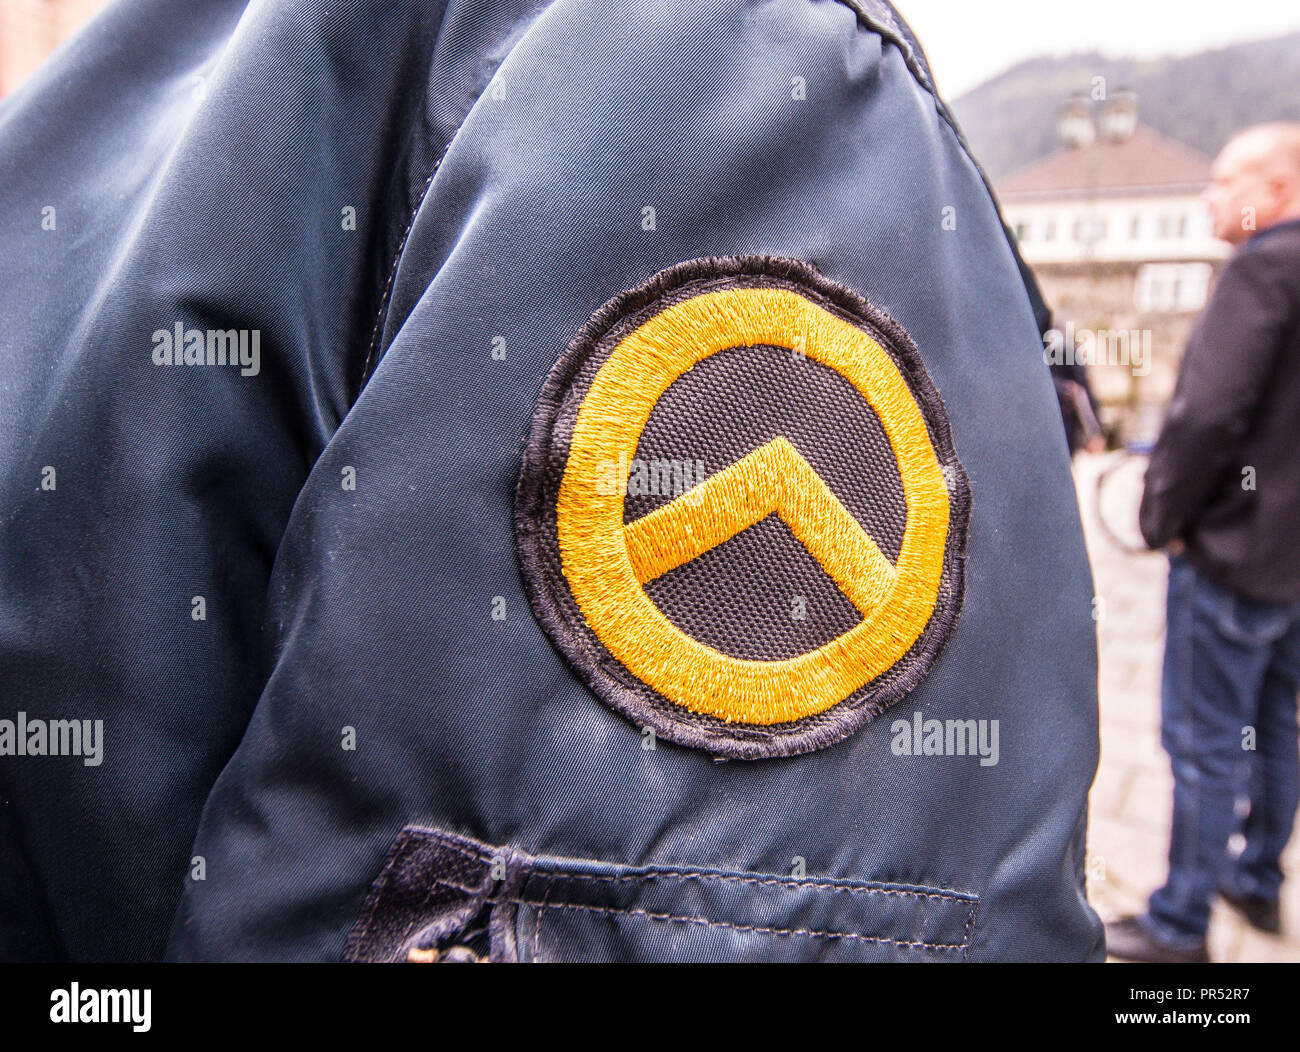 Garmisch Partenkirchen, Bavaria, Germany. 29th Sep, 2018. Logo of the Identitaere Bewegung worn by a person that appeared to be working in a security capacity at the Compact Konferenz in Garmisch Partenkirchen. Adding themselves to the 'who's who'' list of of several hundred right-extremists from Germany, Austria, Switzerland, and other countries, Tommy Robinson, founder of the British EDL, Lutz Bachmann, grounder of Germany's Pegida, and Martin Sellner of the Identitaere Bewegung were guests as the Compact Konferenz held in the international tourist town of Garmisch Partenkirchen Stock Photo